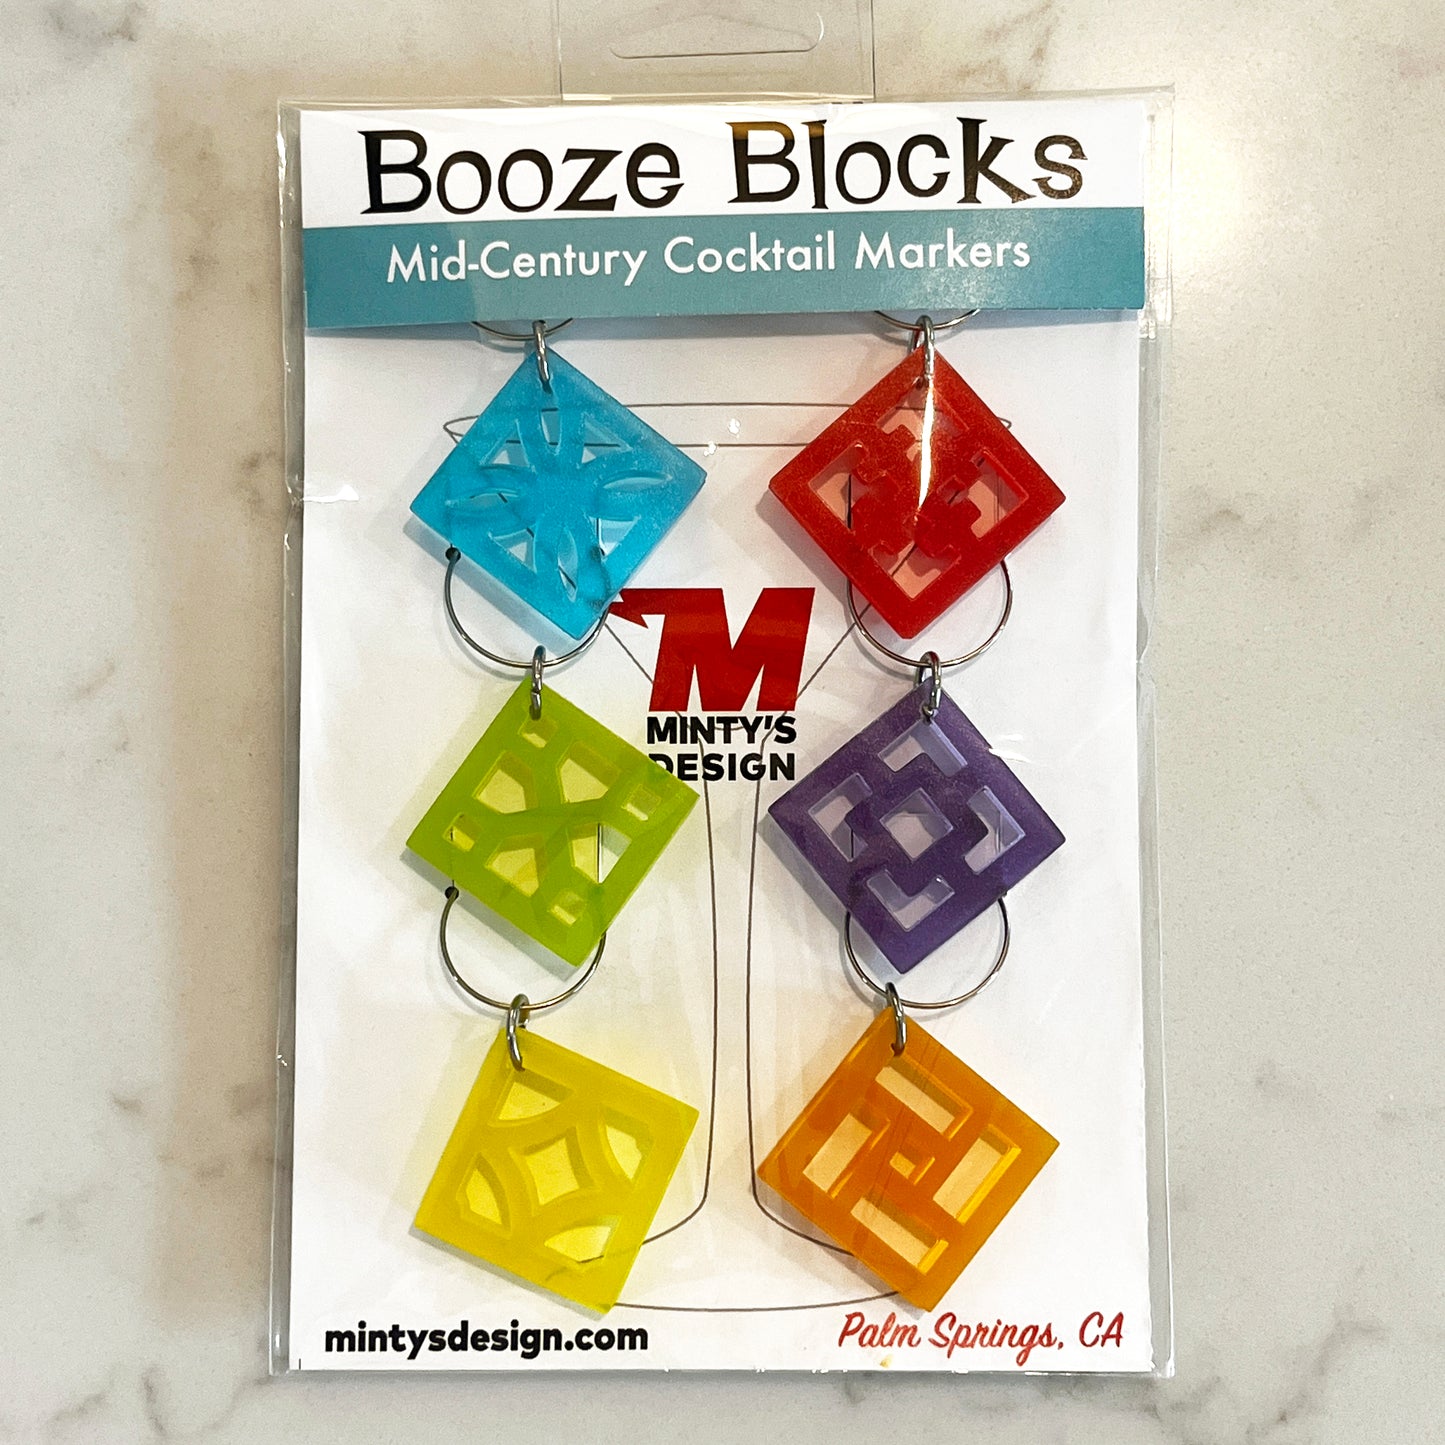 Booze Blocks™ Cocktail Markers